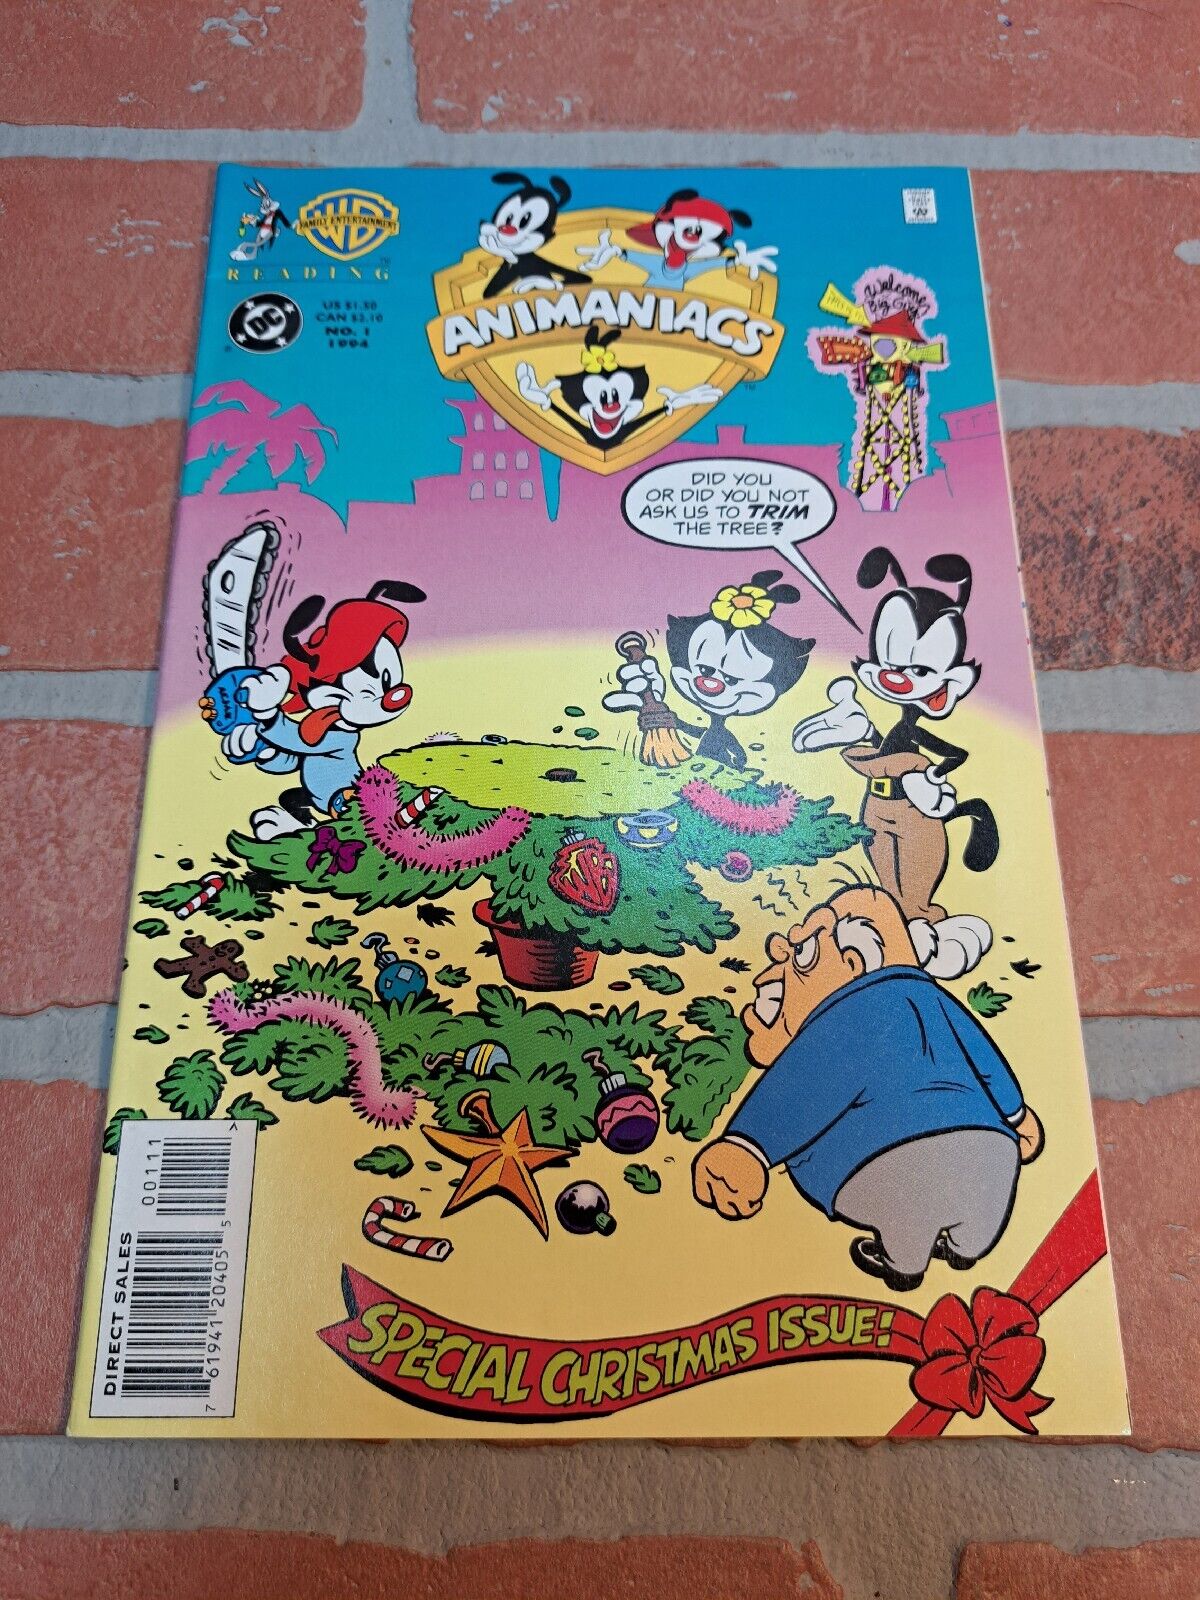 ANIMANIACS #1 SPECIAL CHRISTMAS ISSUE DECEMBER 1994 DC COMICS WARNER BROS.